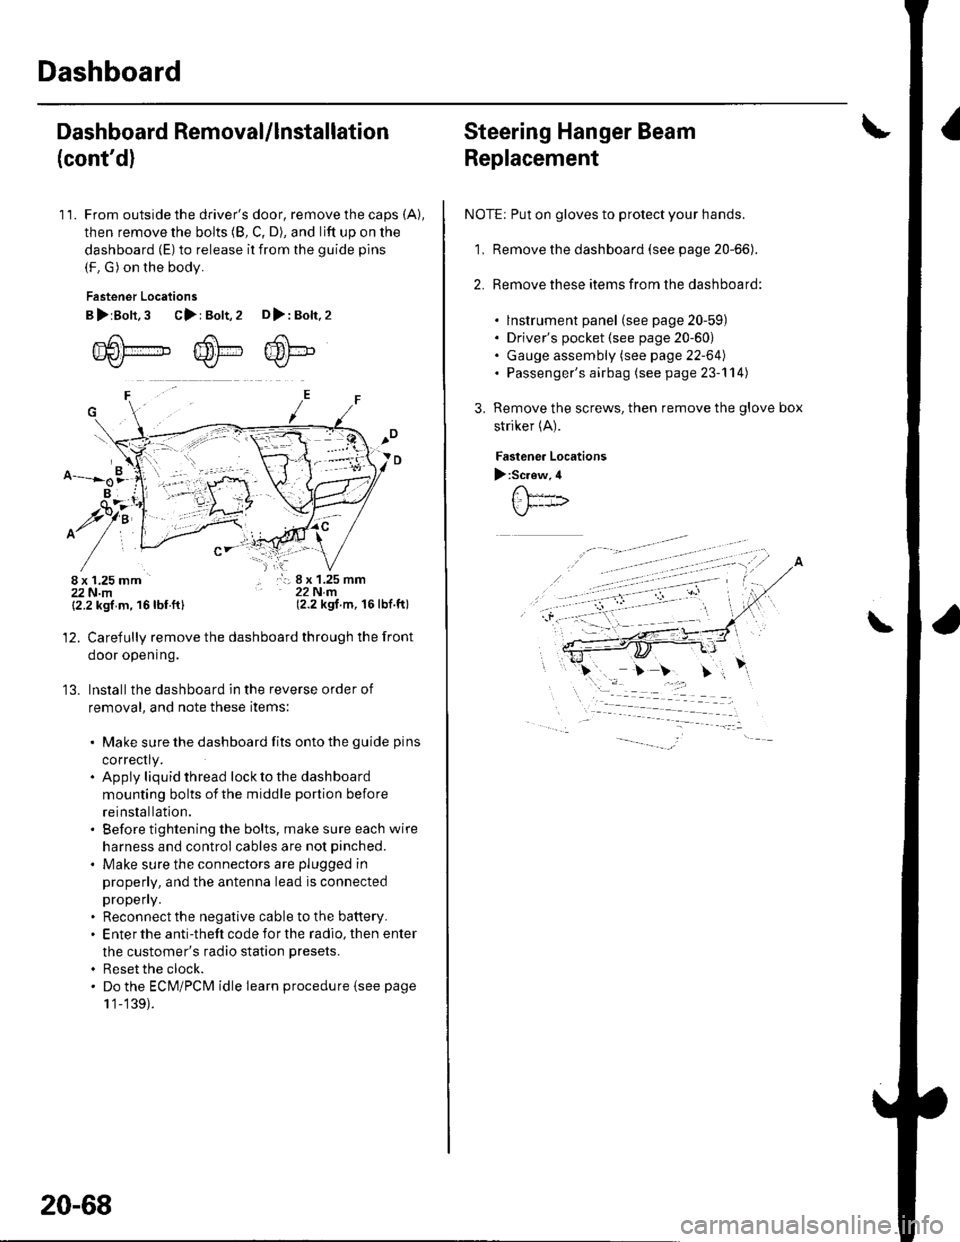 HONDA CIVIC 2002 7.G Workshop Manual Dashboard
Dashboard Removal/lnstallation
(contd)
11. From outside the drivers door, remove the caps (A),
then remove the bolts (8, C, D), and lift up on the
dashboard (E) to release it from the guid